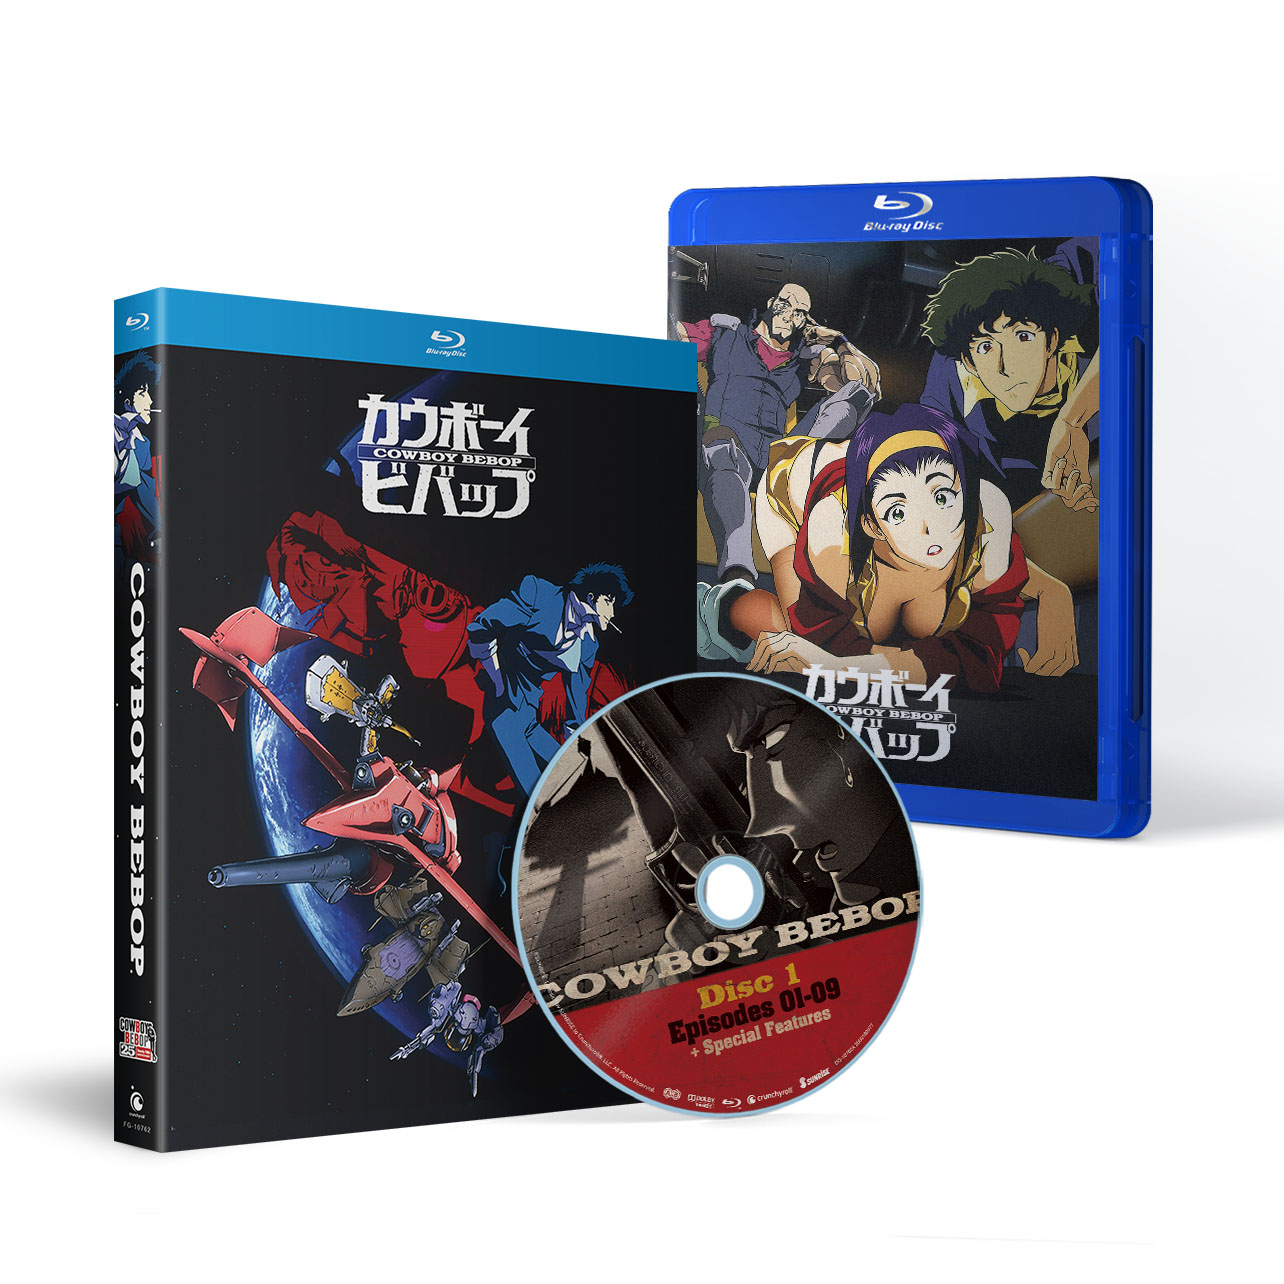 The Cowboy Bebop 25th Anniversary Blu-ray Box Set is heading our 